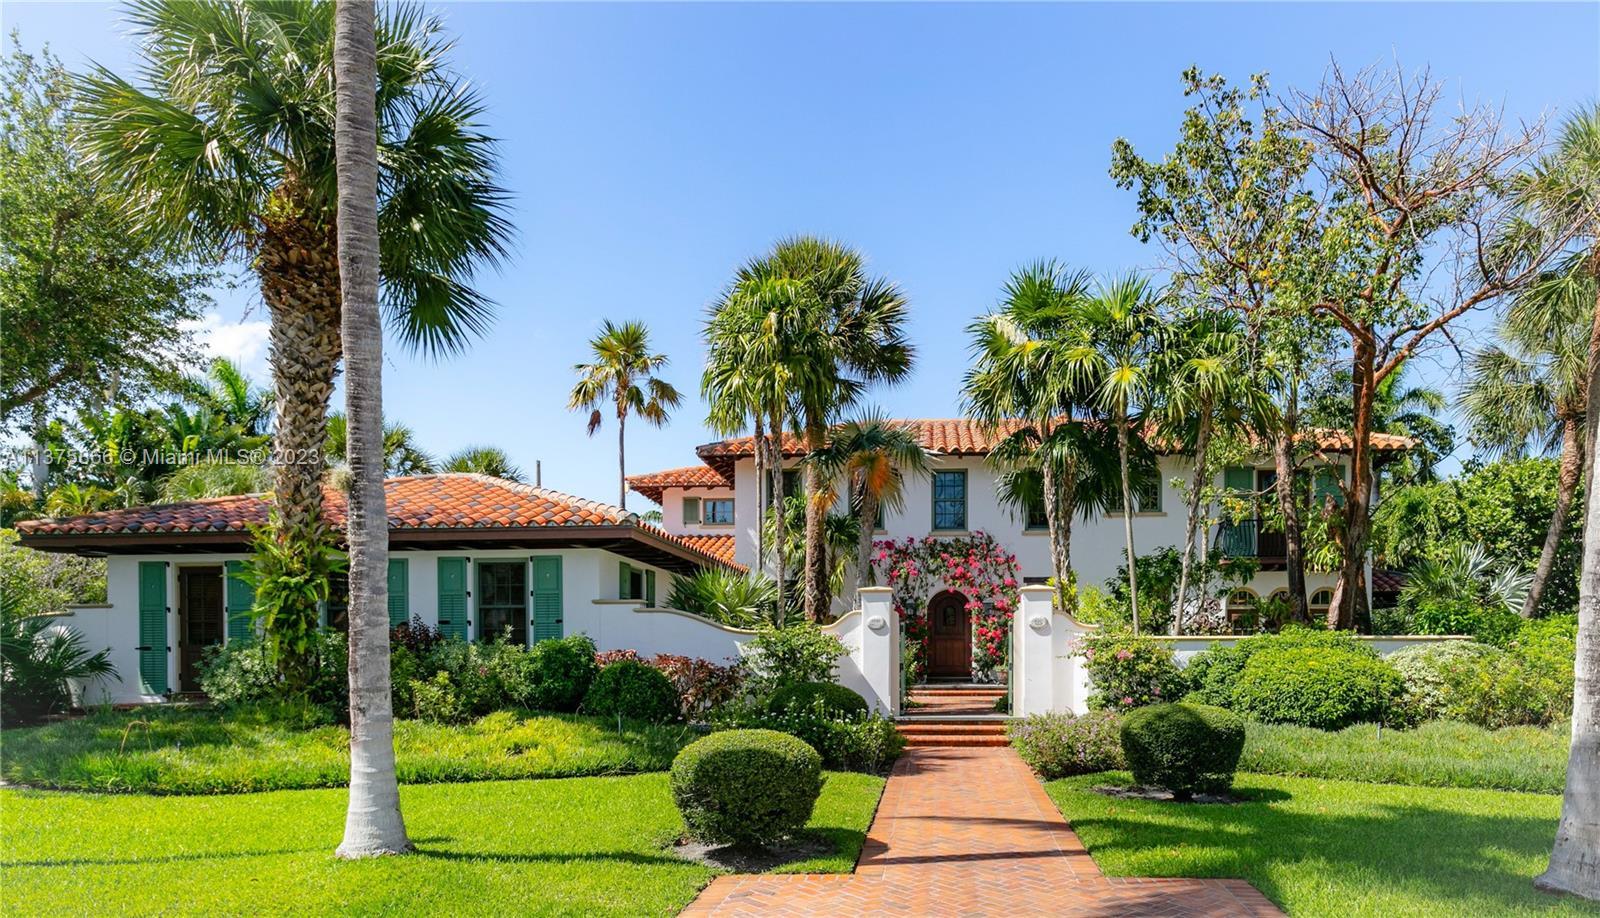 This 2-story Mediterranean revival exudes the charm and warmth typically found in fairytales. The 19